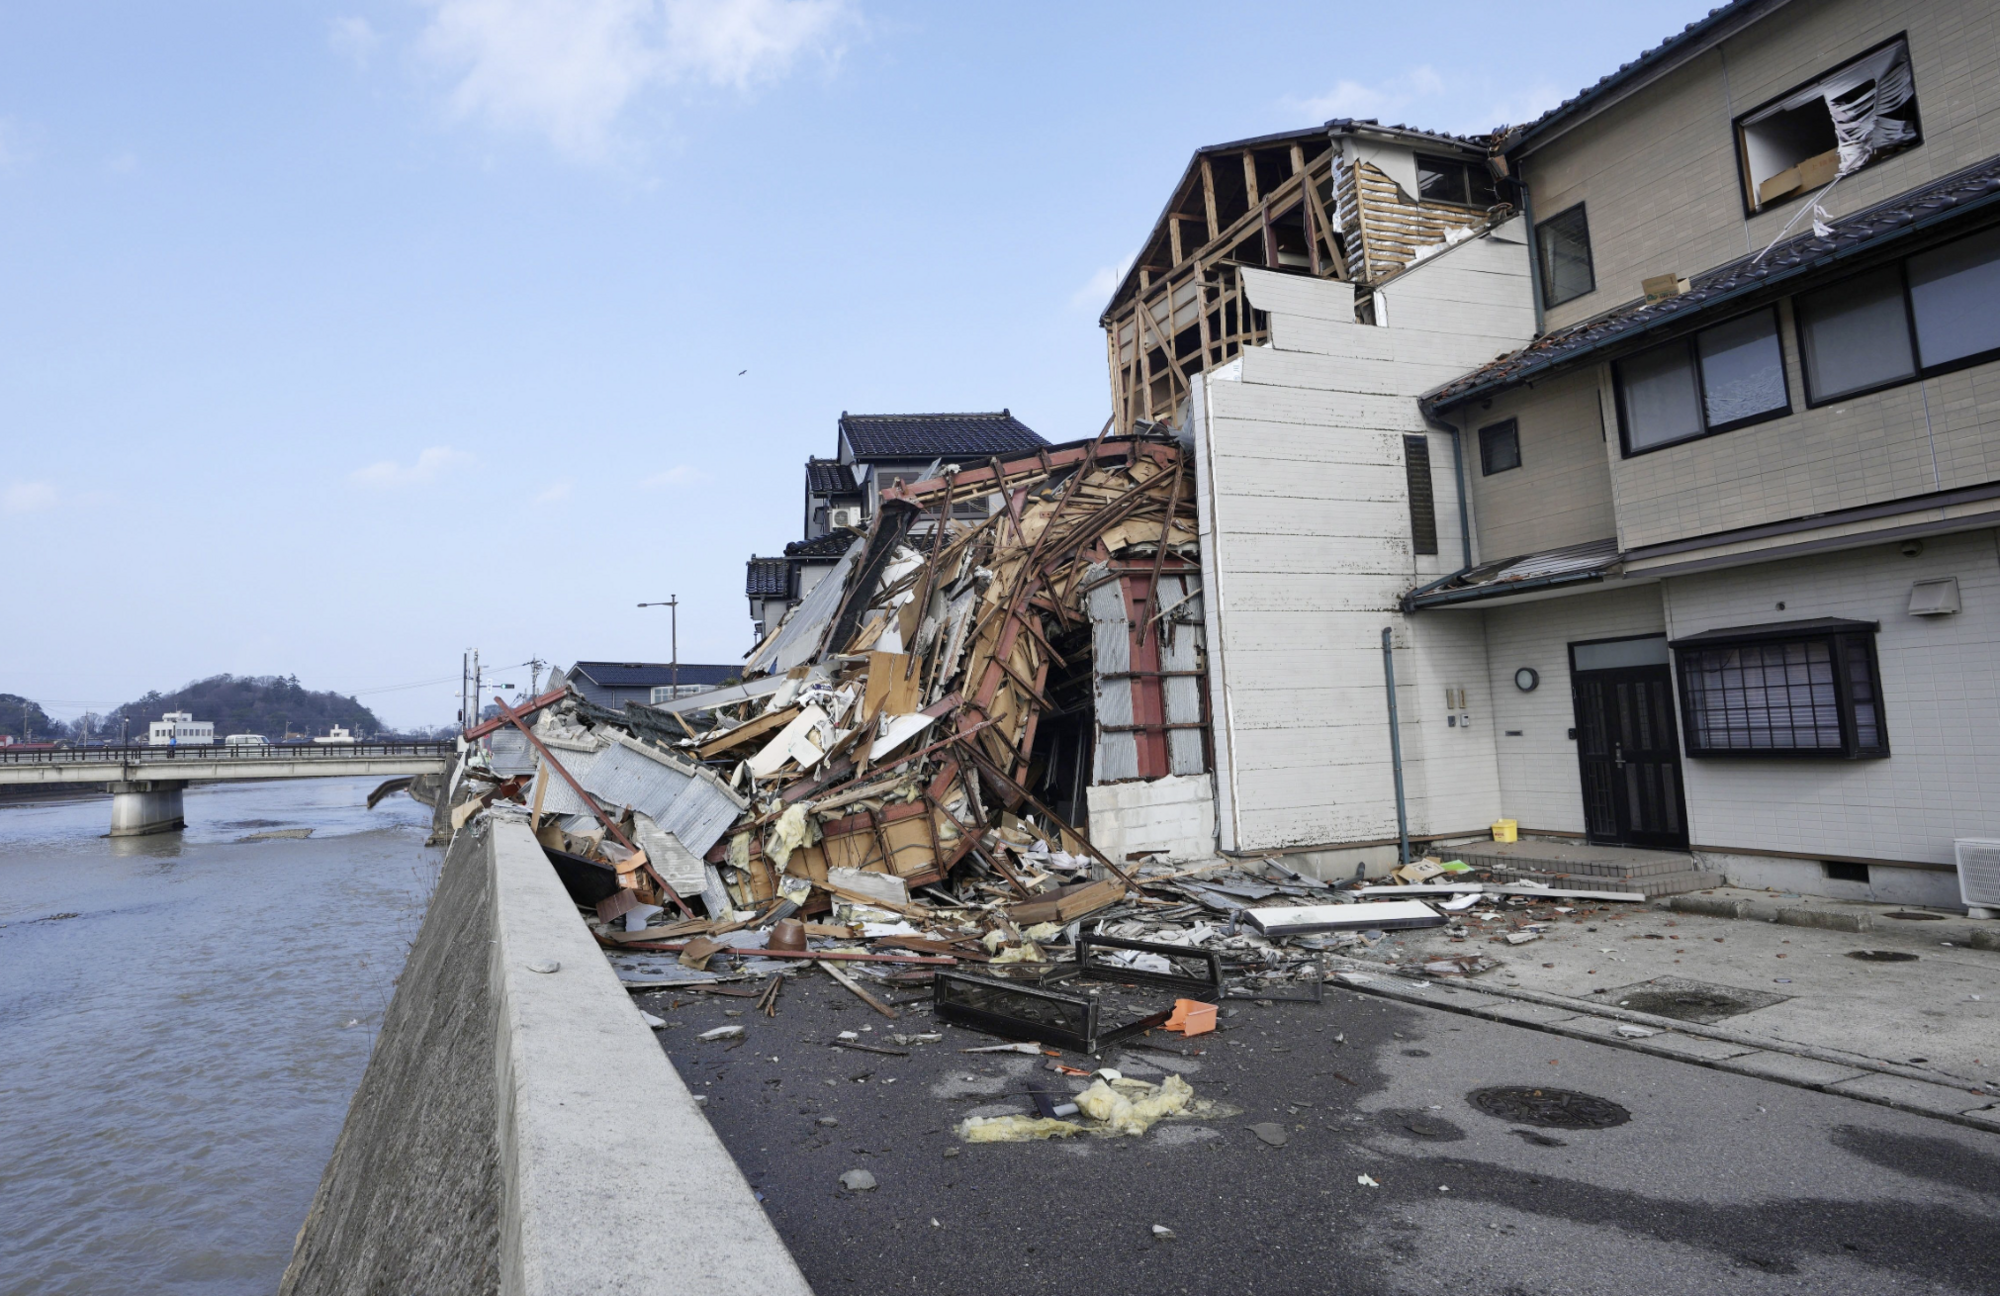 Earthquake in Japan already killed 126 people: Search operations continue